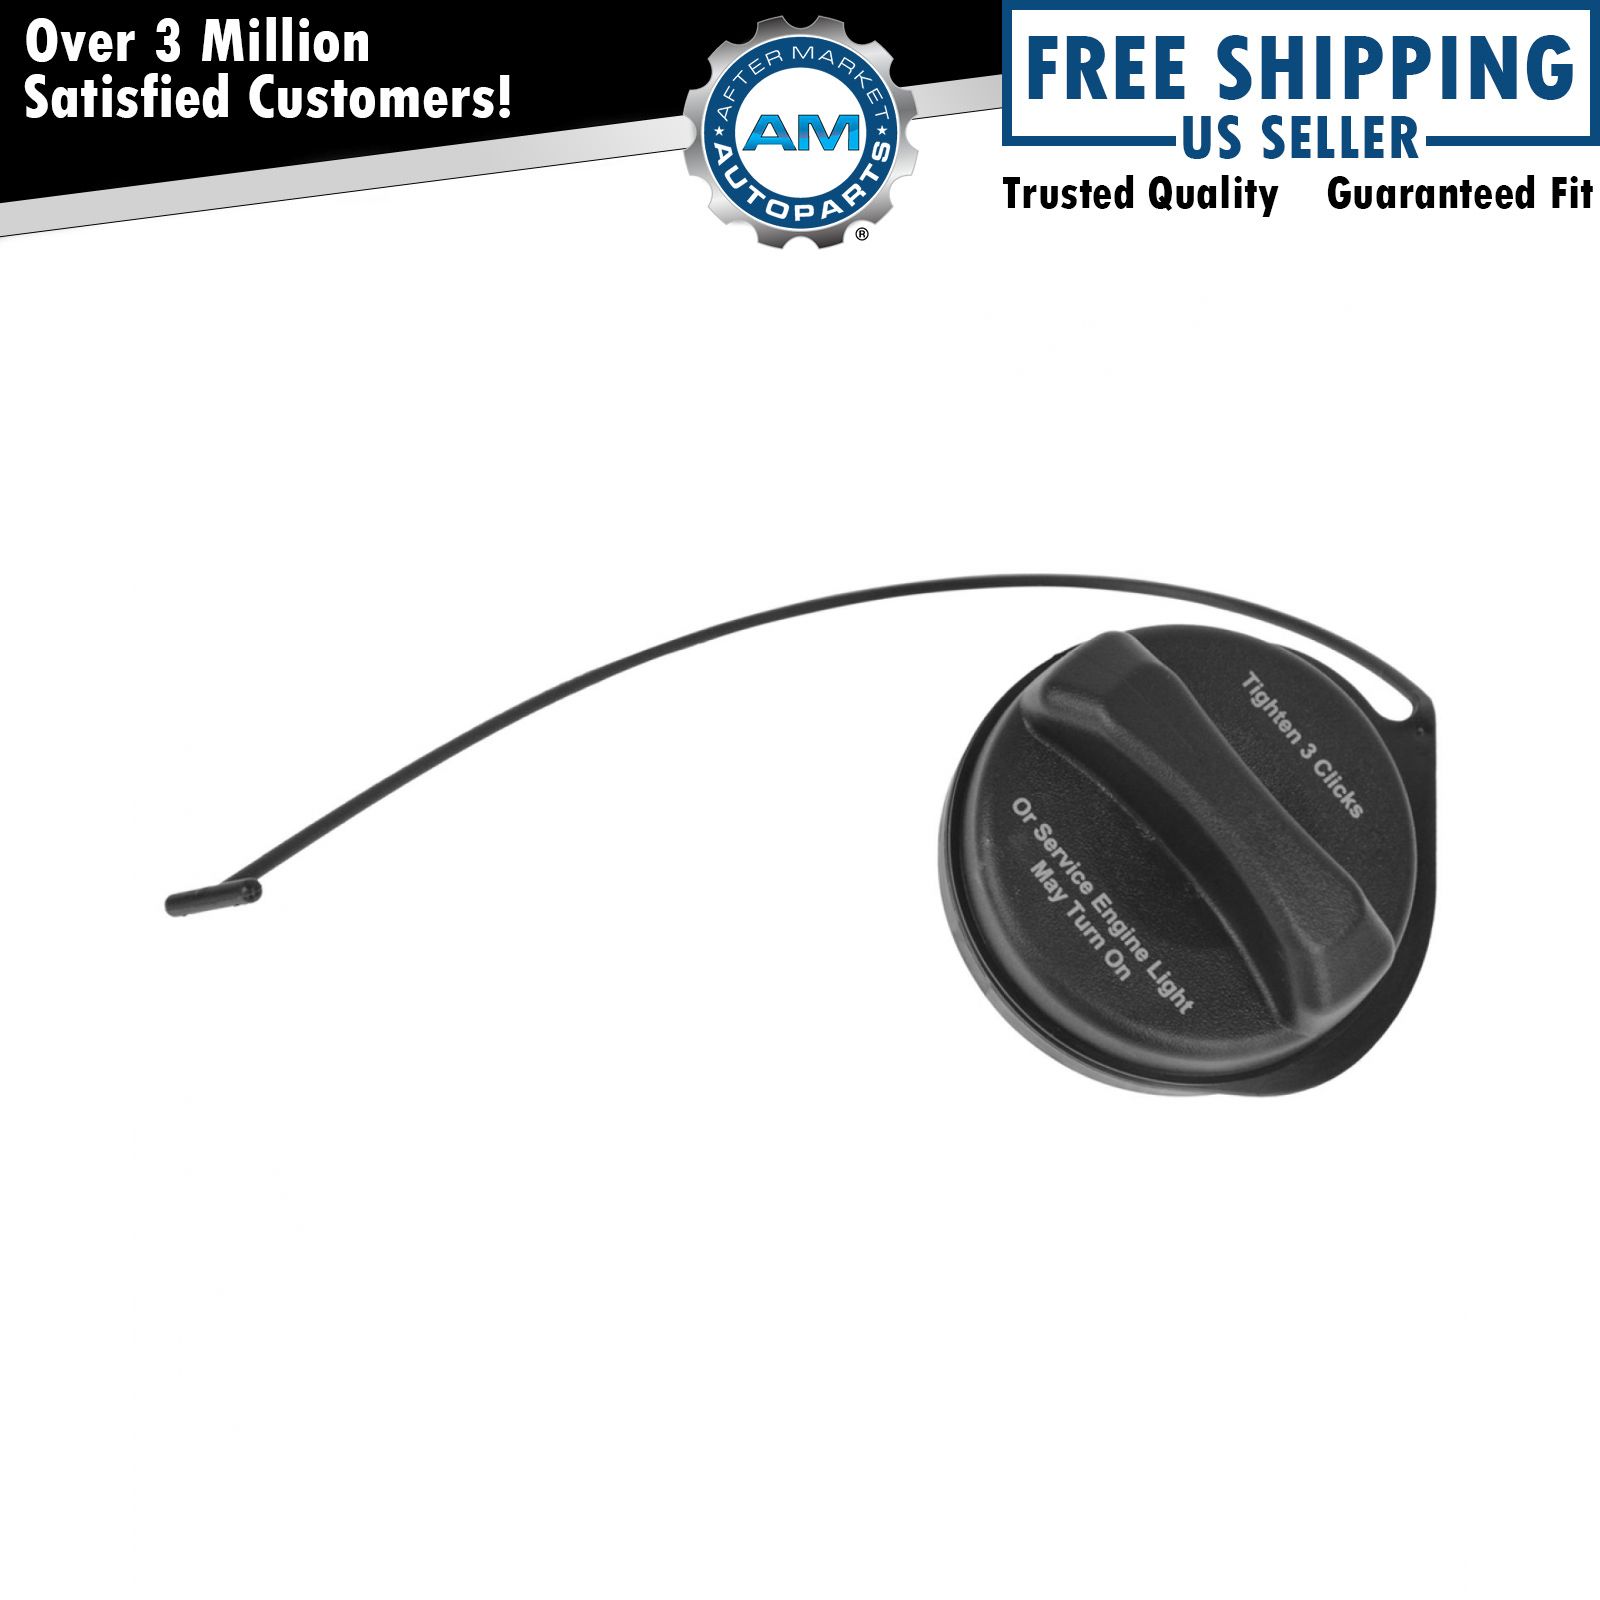 AC Delco GT330 Gas Fuel Tank Filler Cap for Chevy GMC Buick Cadillac Saturn New